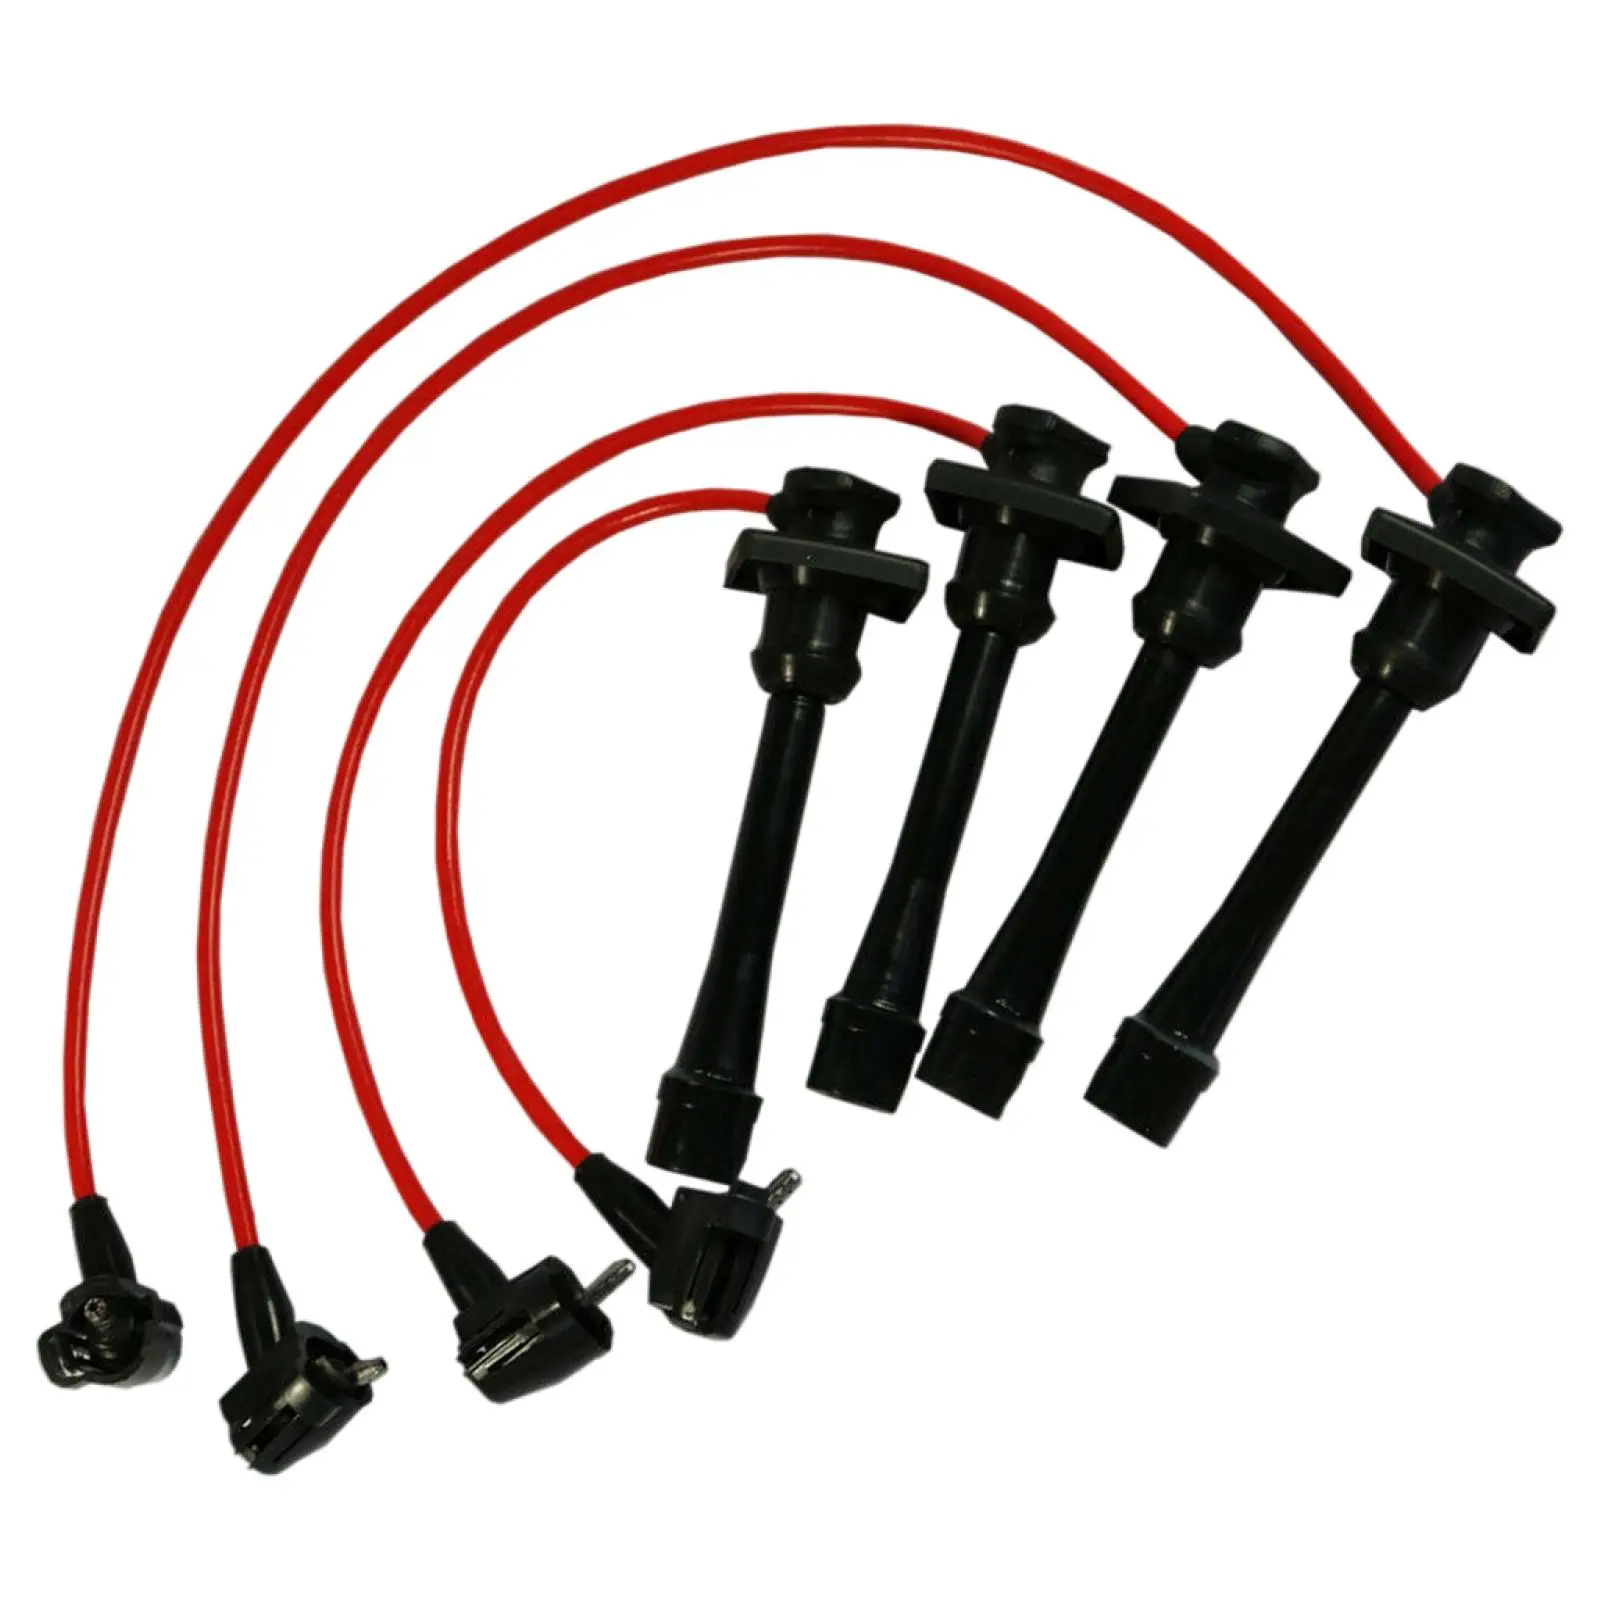 4x Spark Plug Wires Silicone Outer for   1.6L 1.8L 1993-1997